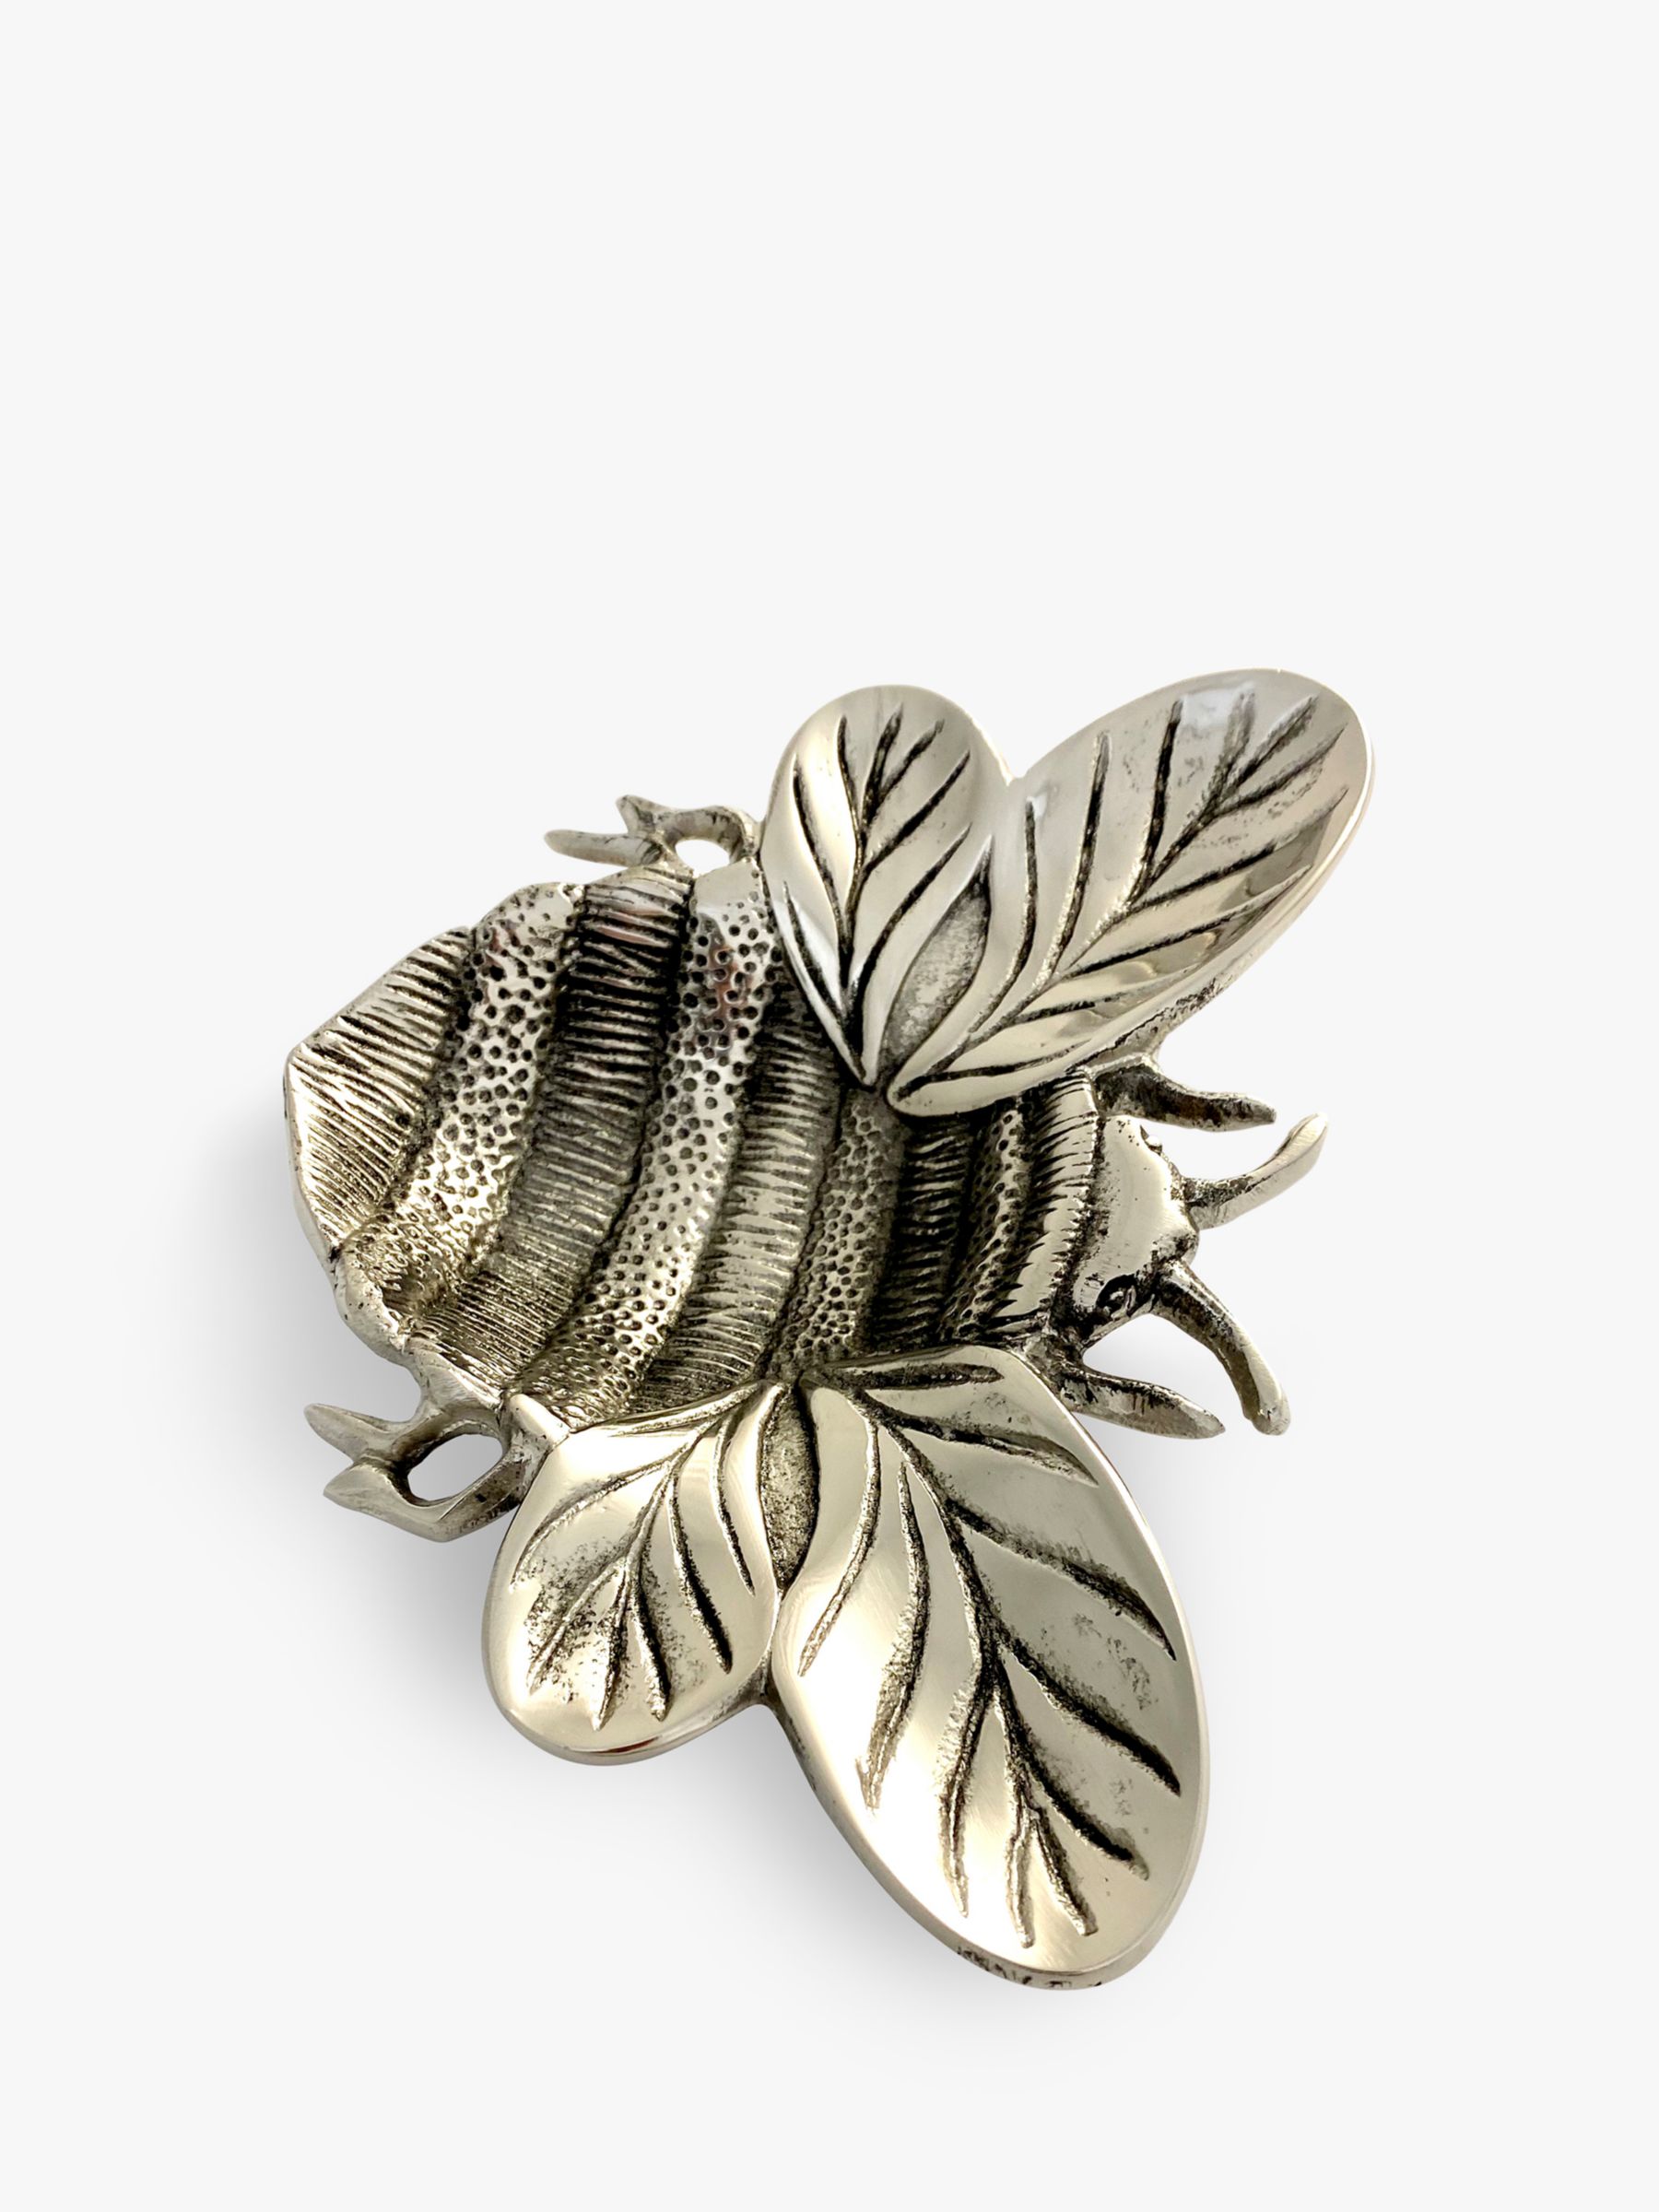 Culinary Concepts Bee Trinket Dish £29.95